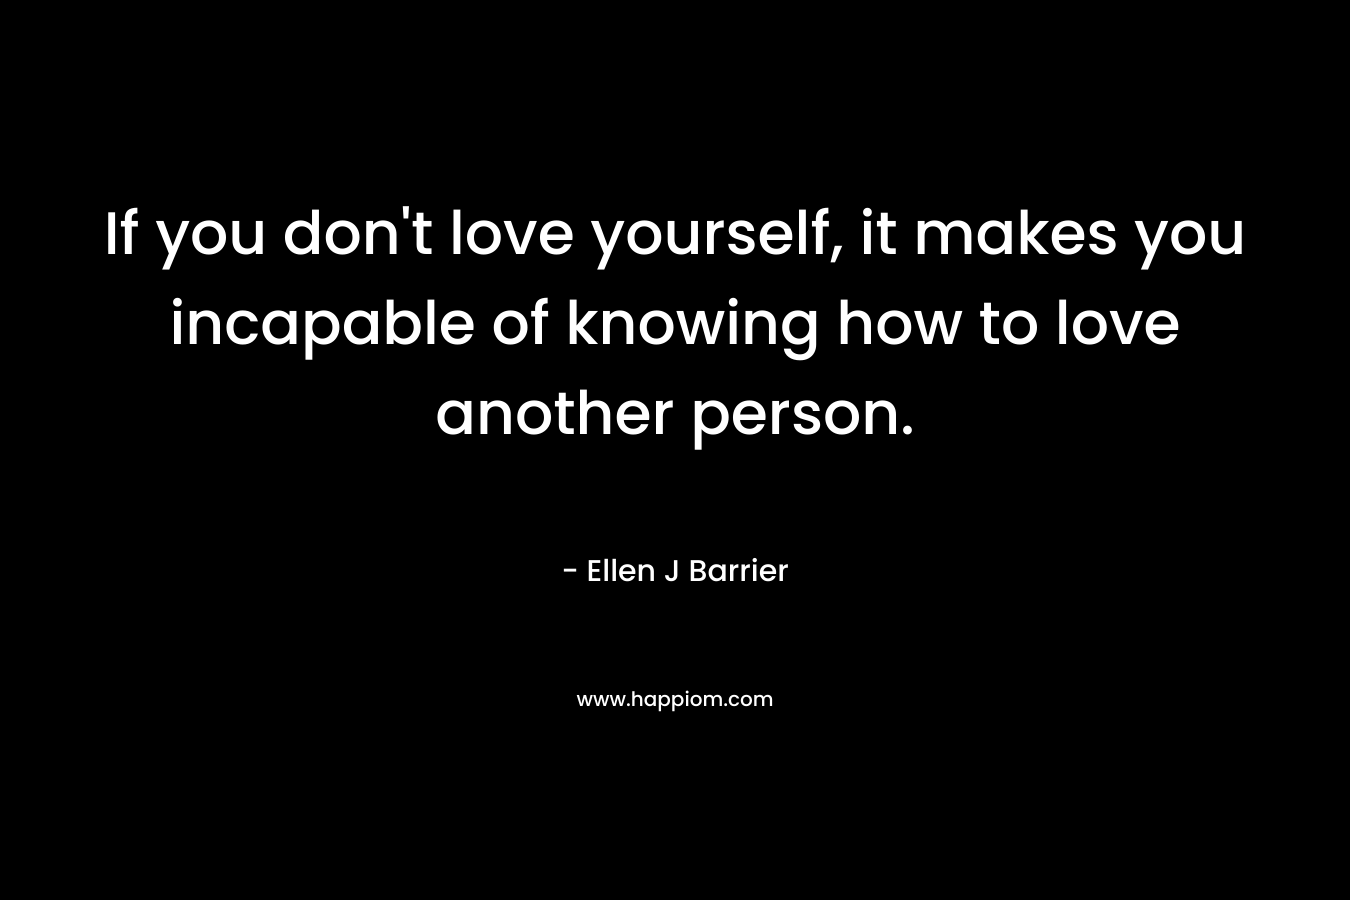 If you don't love yourself, it makes you incapable of knowing how to love another person.